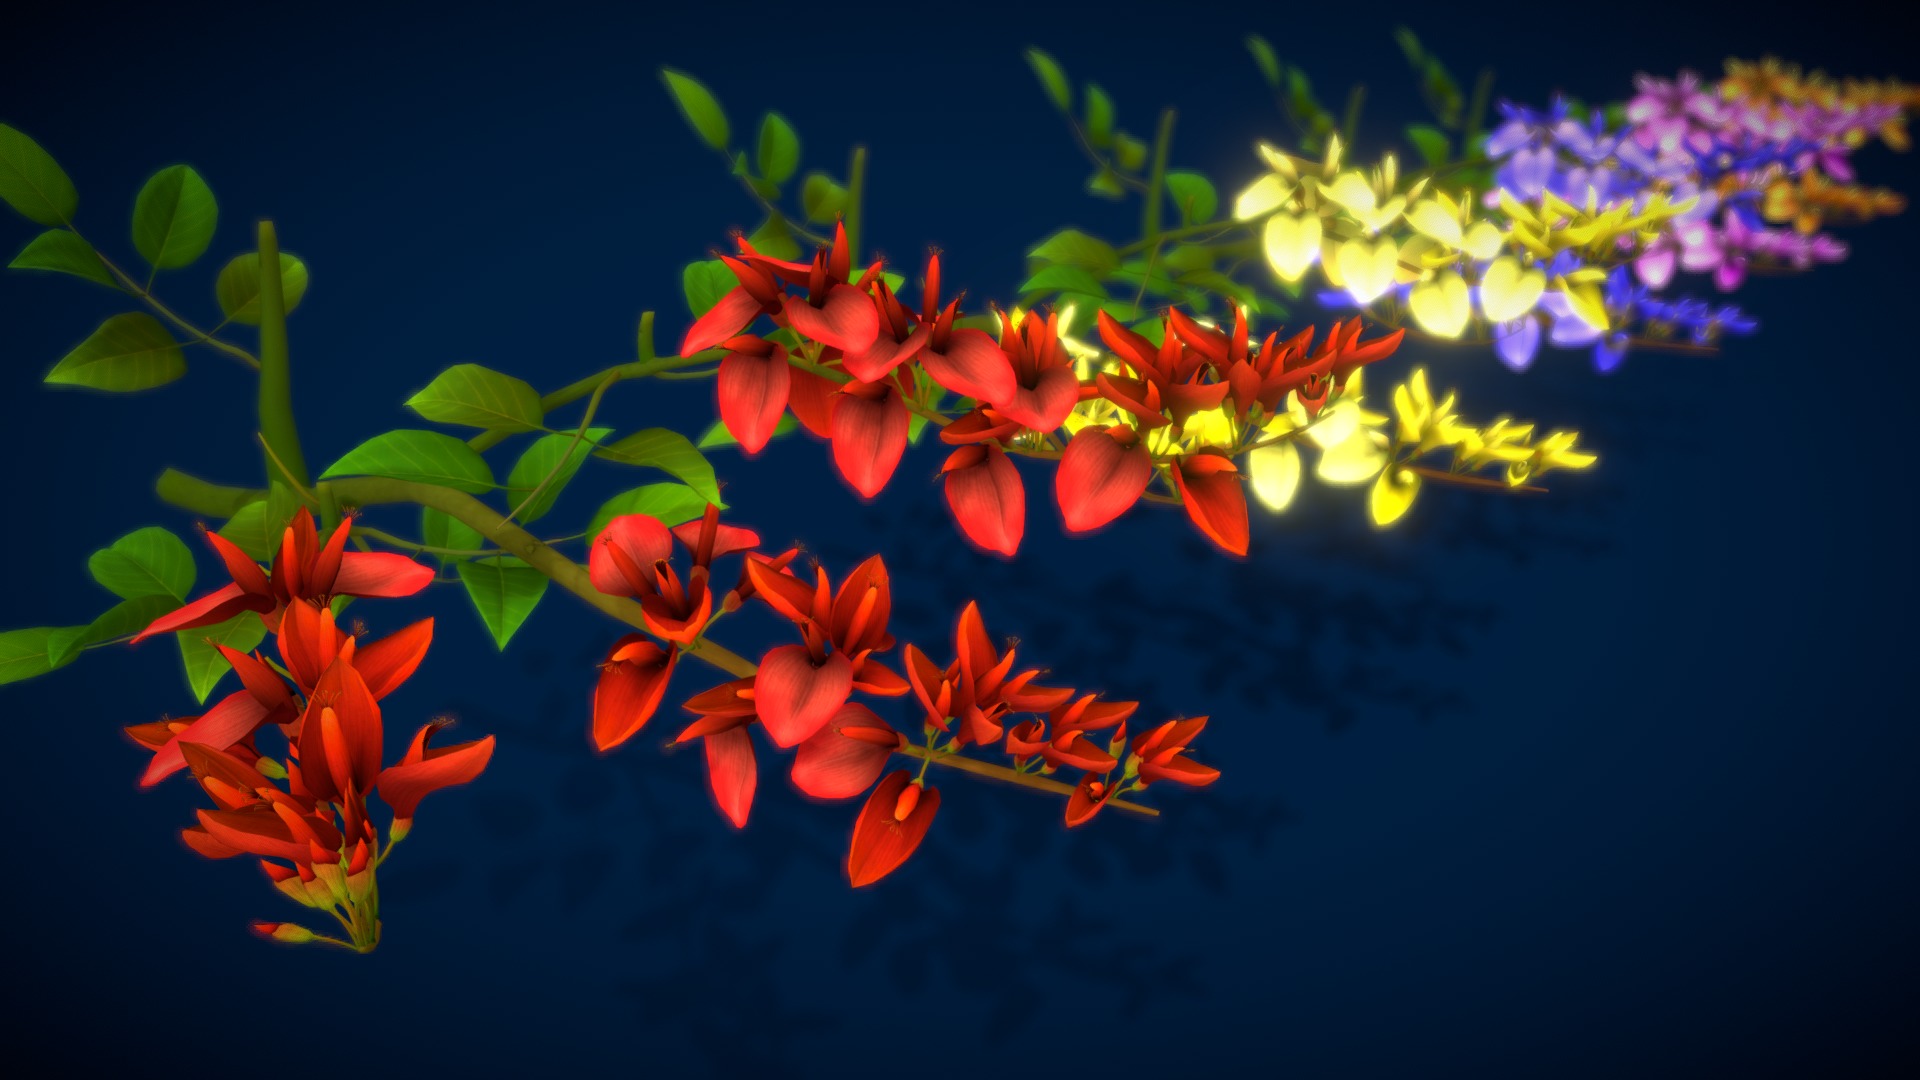 3D model Flower Erythrina Crista-galli - This is a 3D model of the Flower Erythrina Crista-galli. The 3D model is about a close-up of some flowers.